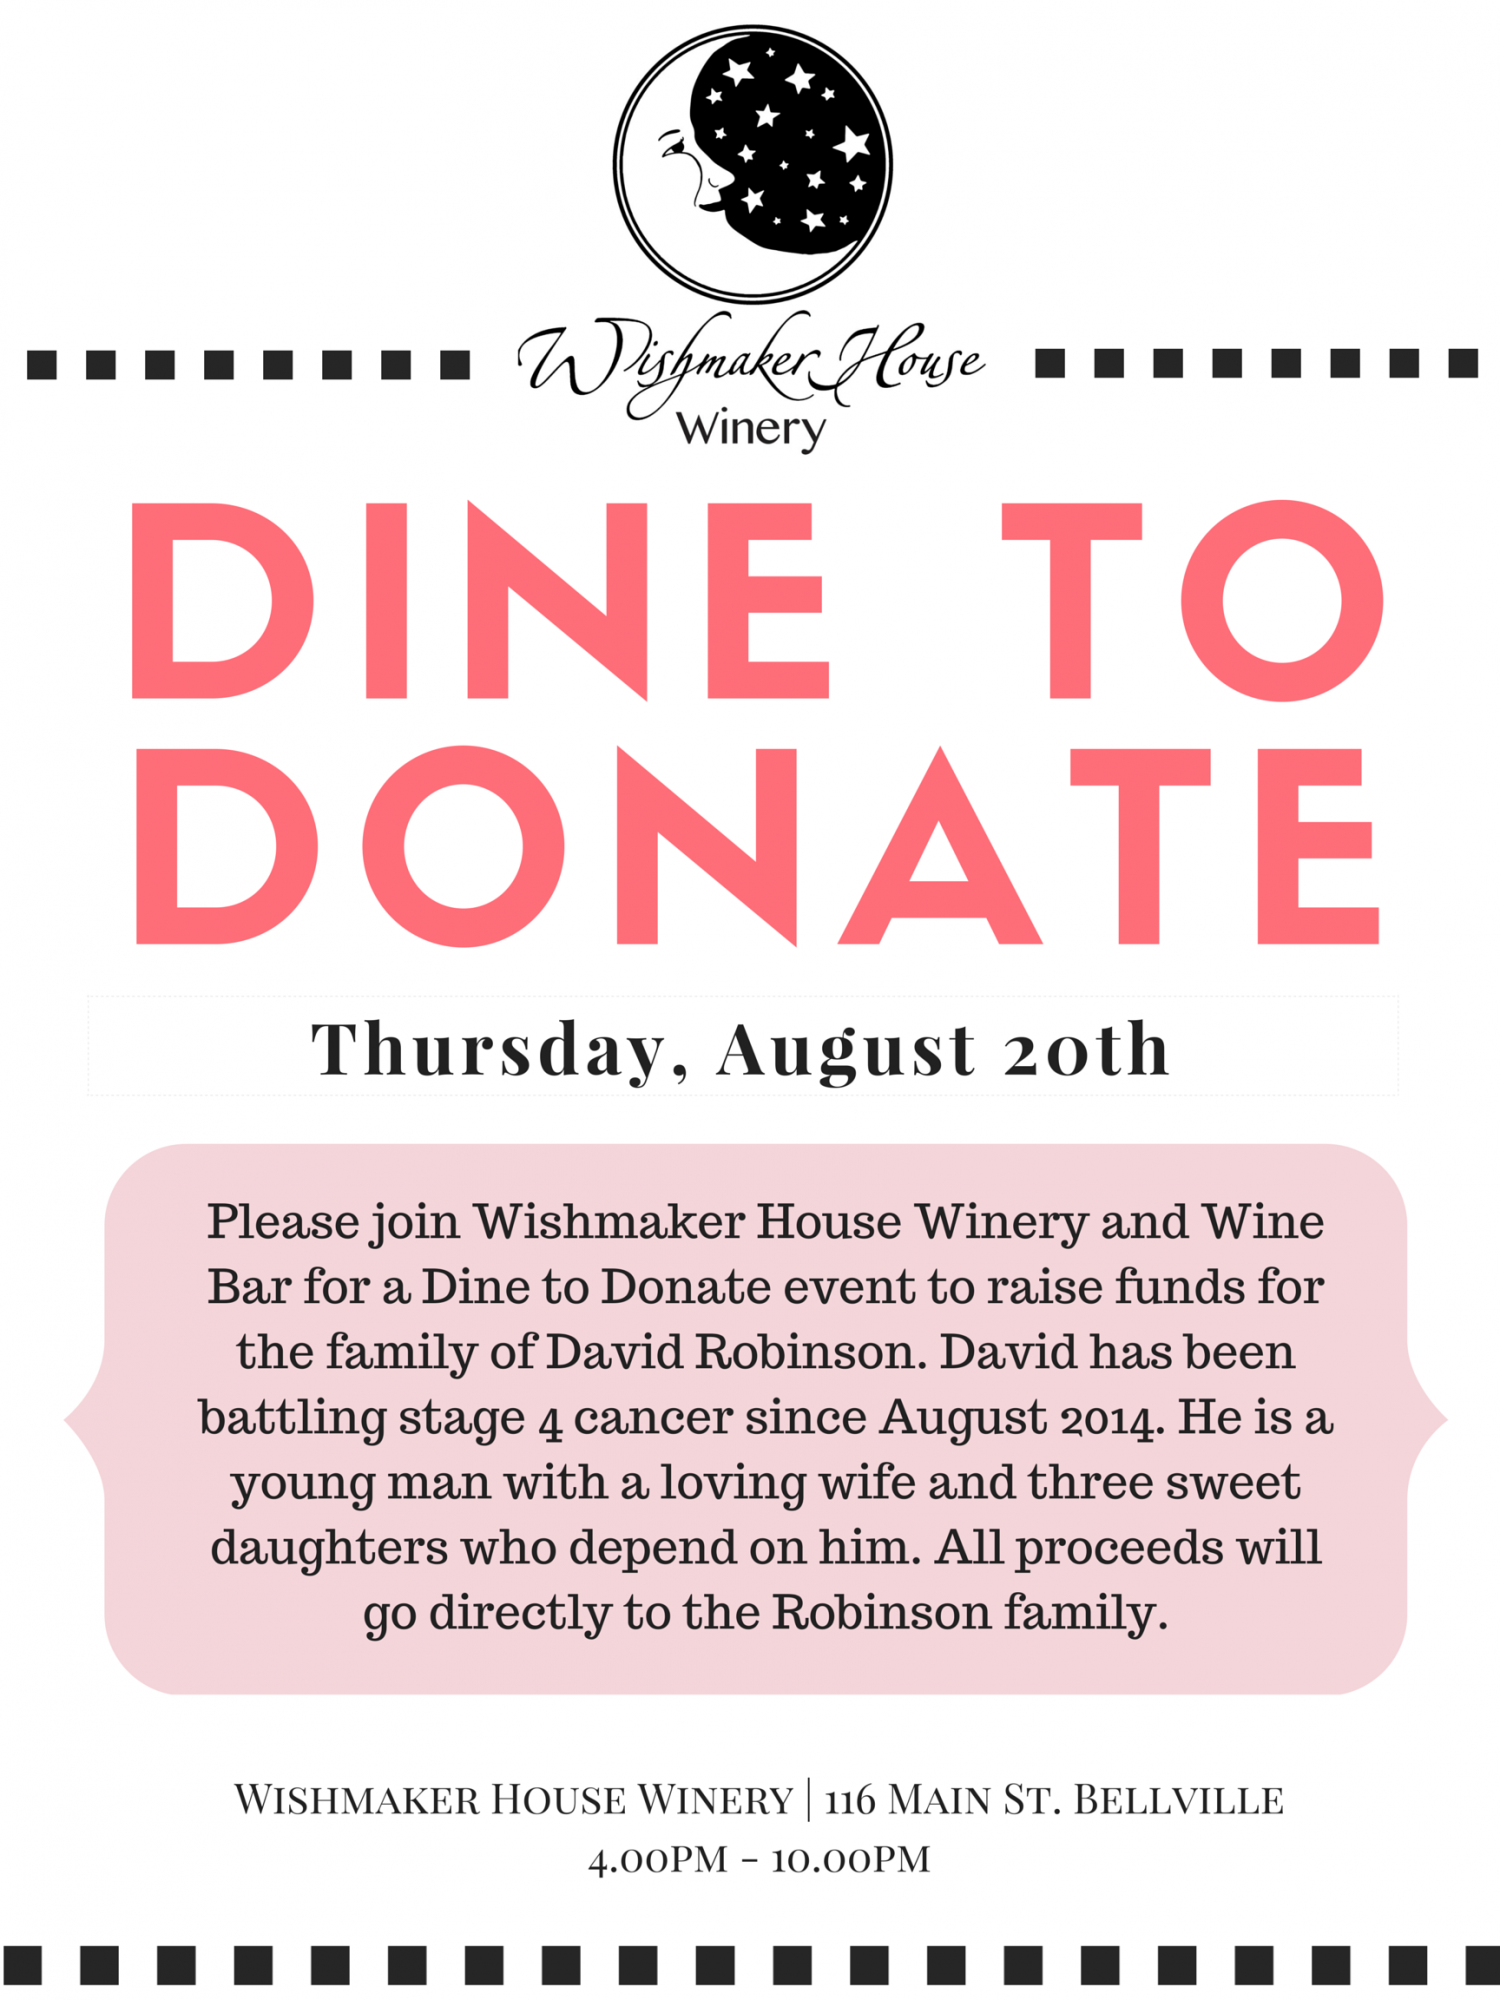 Dine to Donate for the Robinson Family